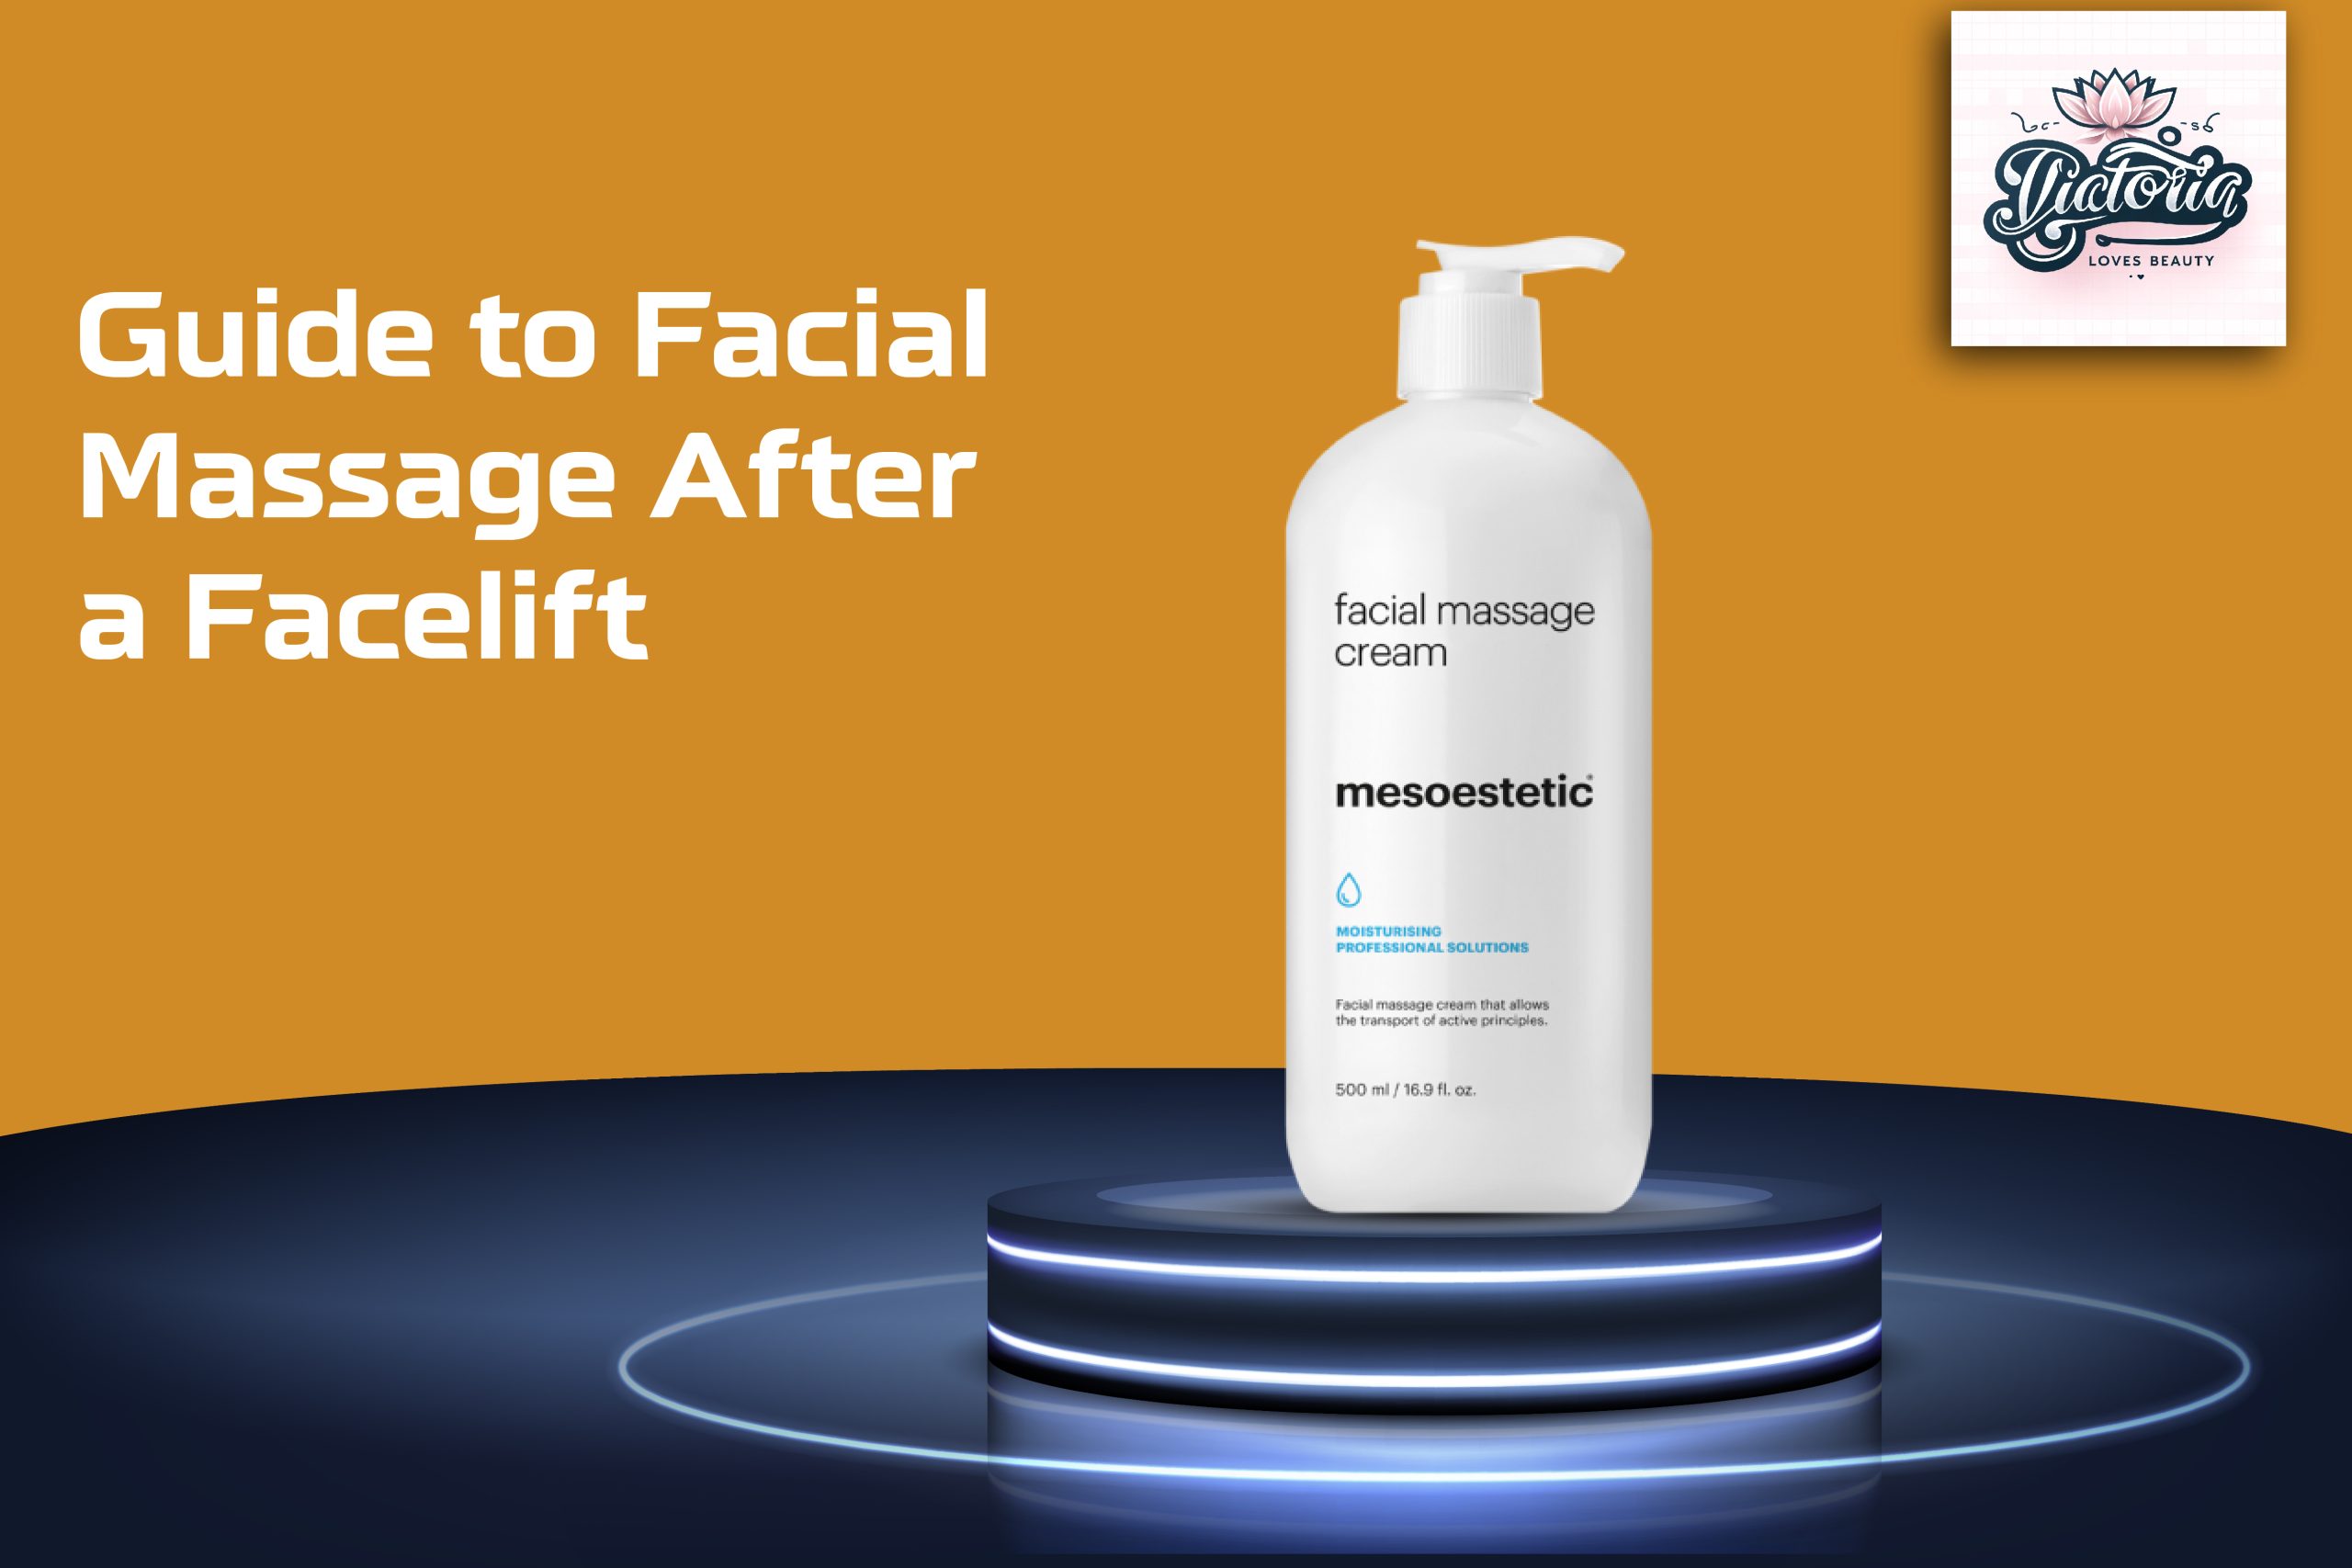 Guide to Facial Massage After a Facelift